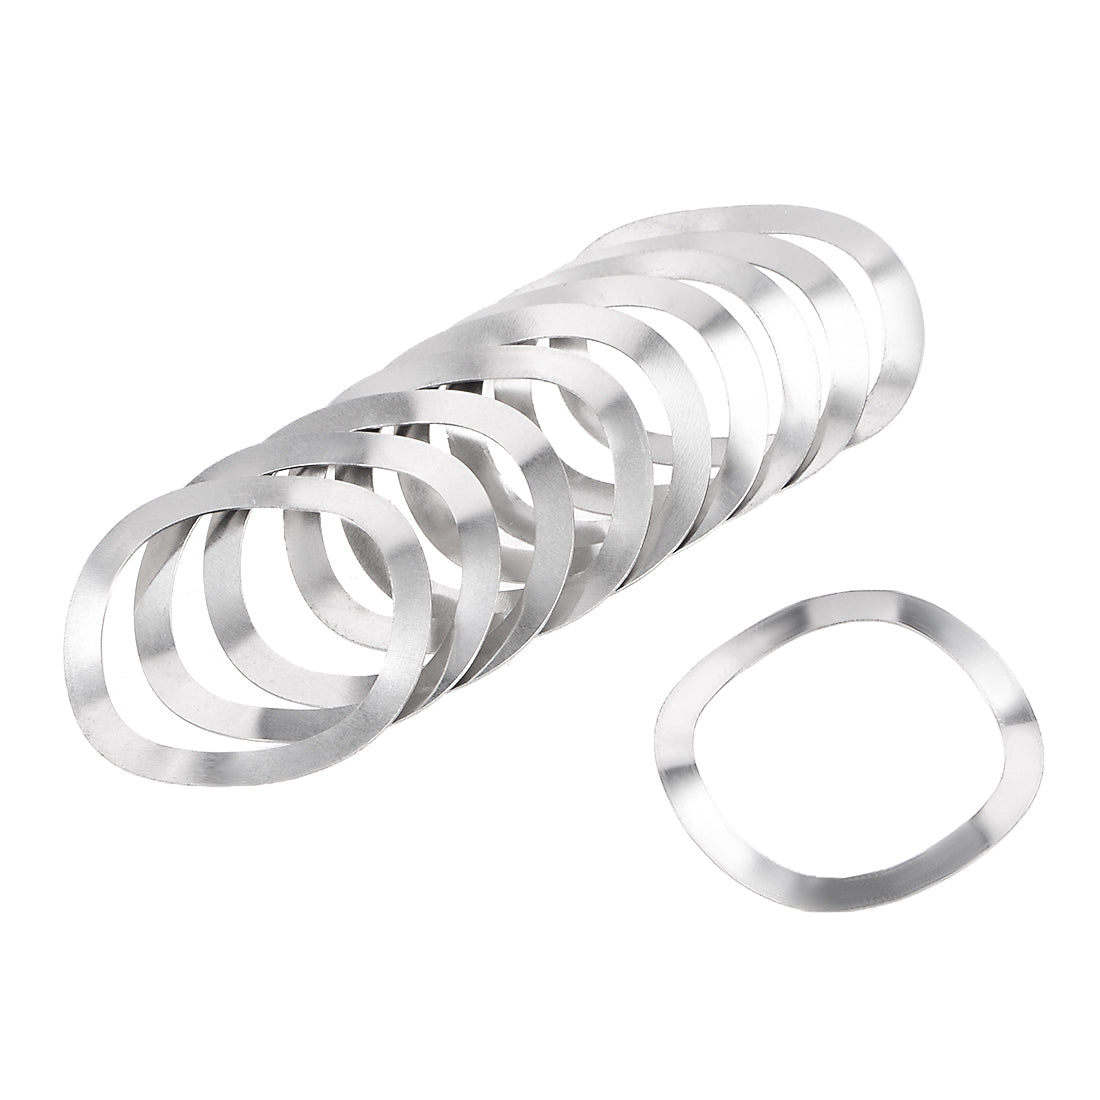 uxcell Uxcell 10Pcs 304 Stainless Steel Wave Spring Washer for Screw Bolt